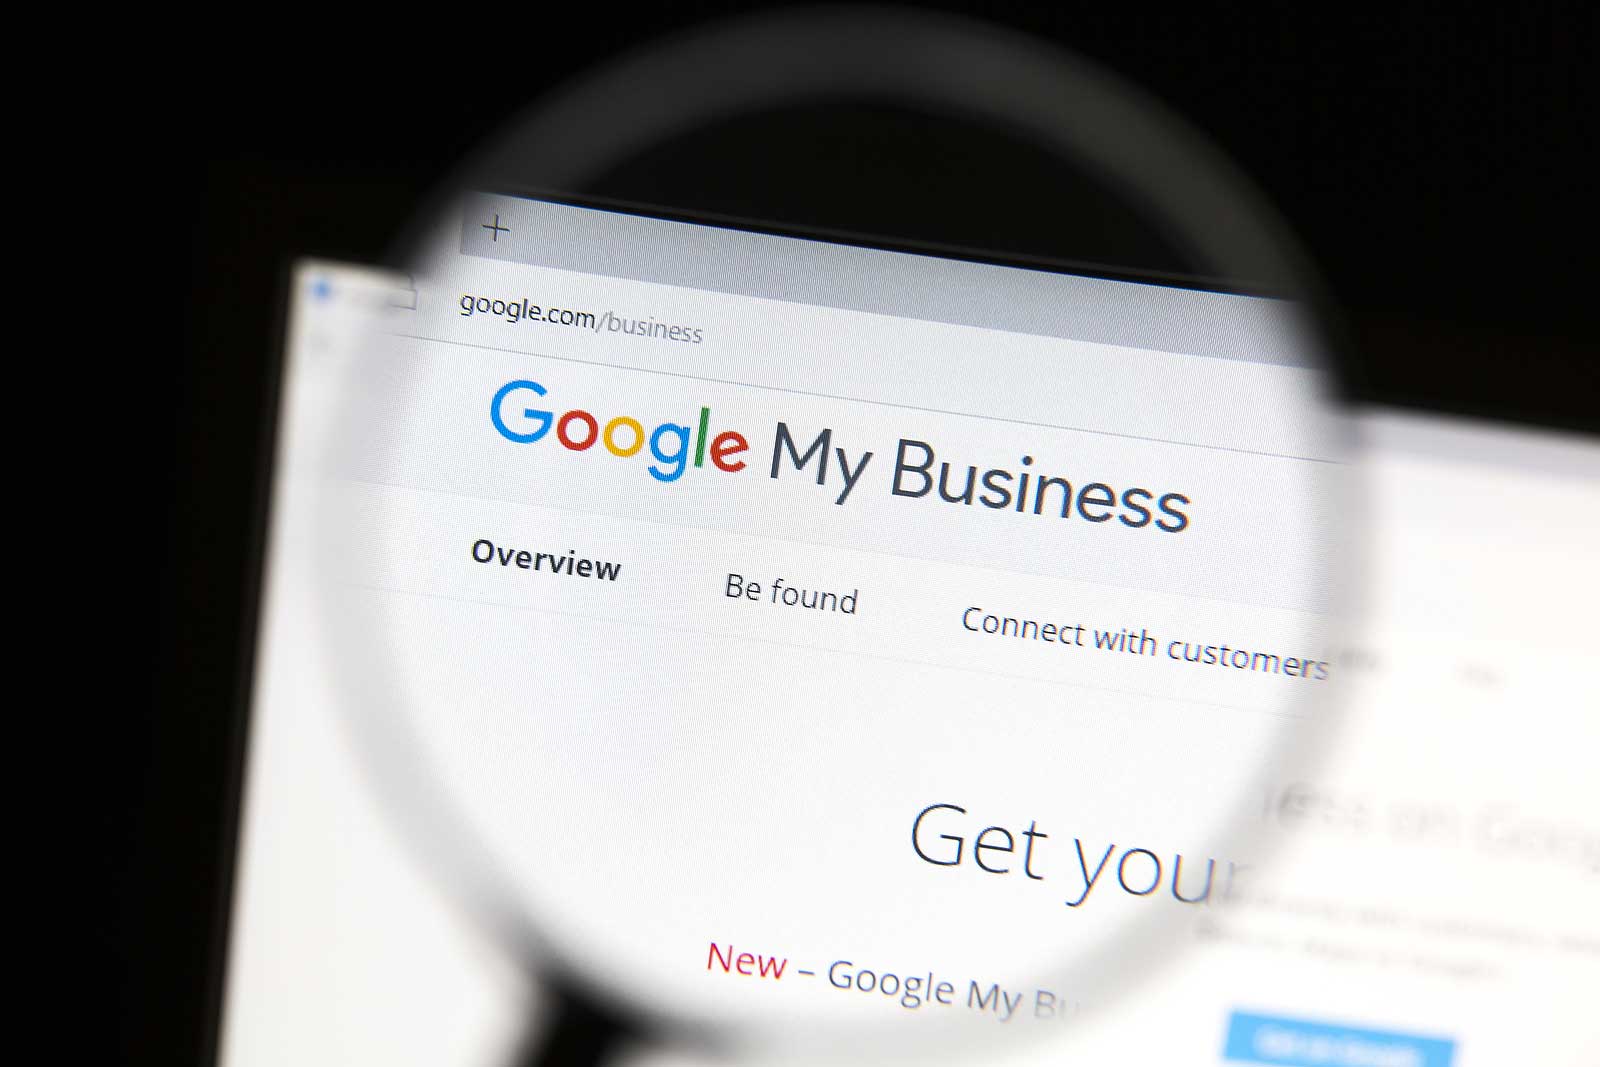 How To Completely Optimize Your Google Business Profile